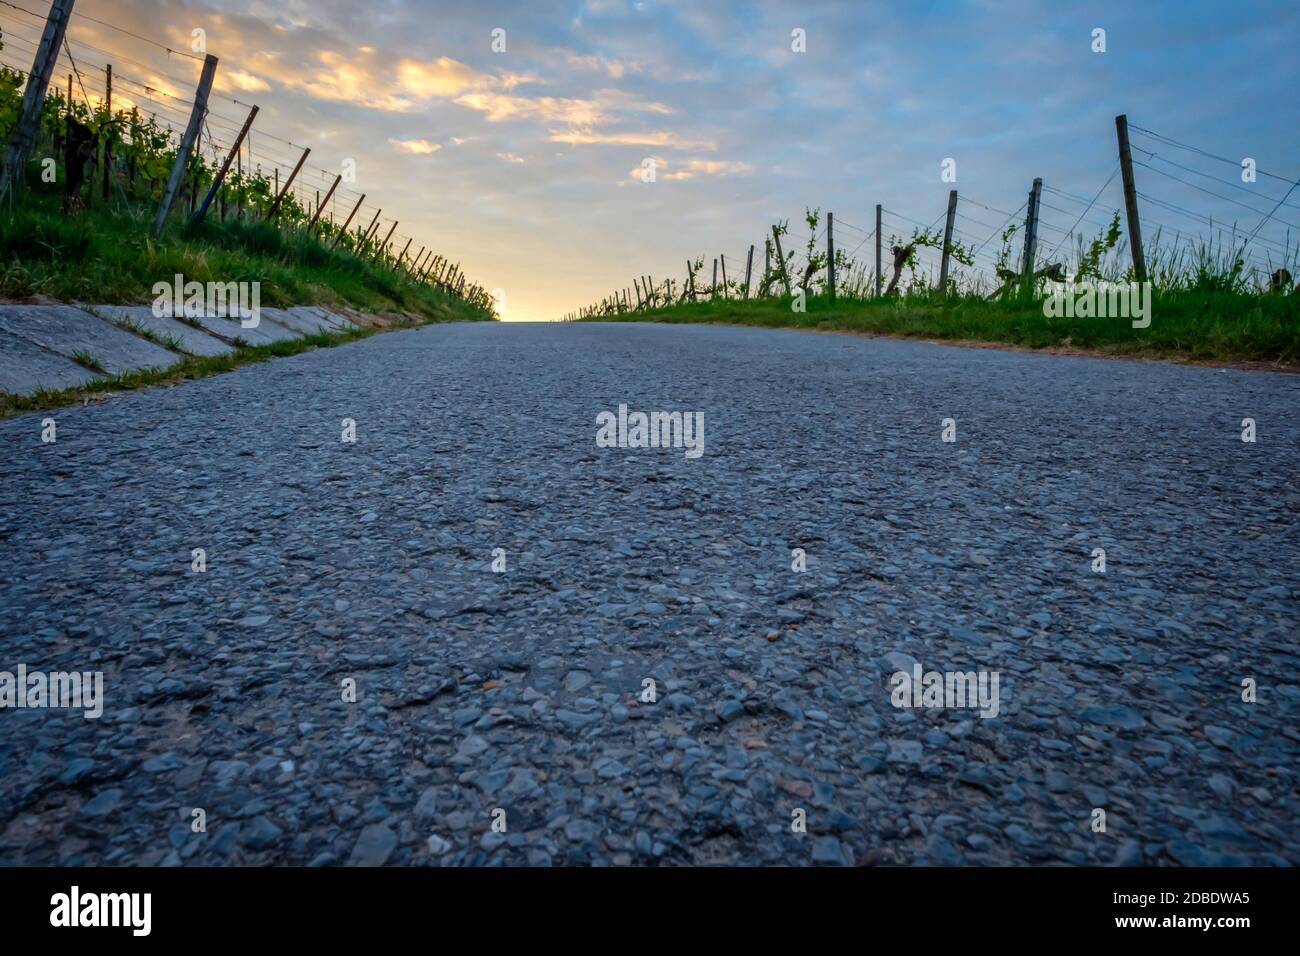 Road in vineyard with clouds in the sky Stock Photo